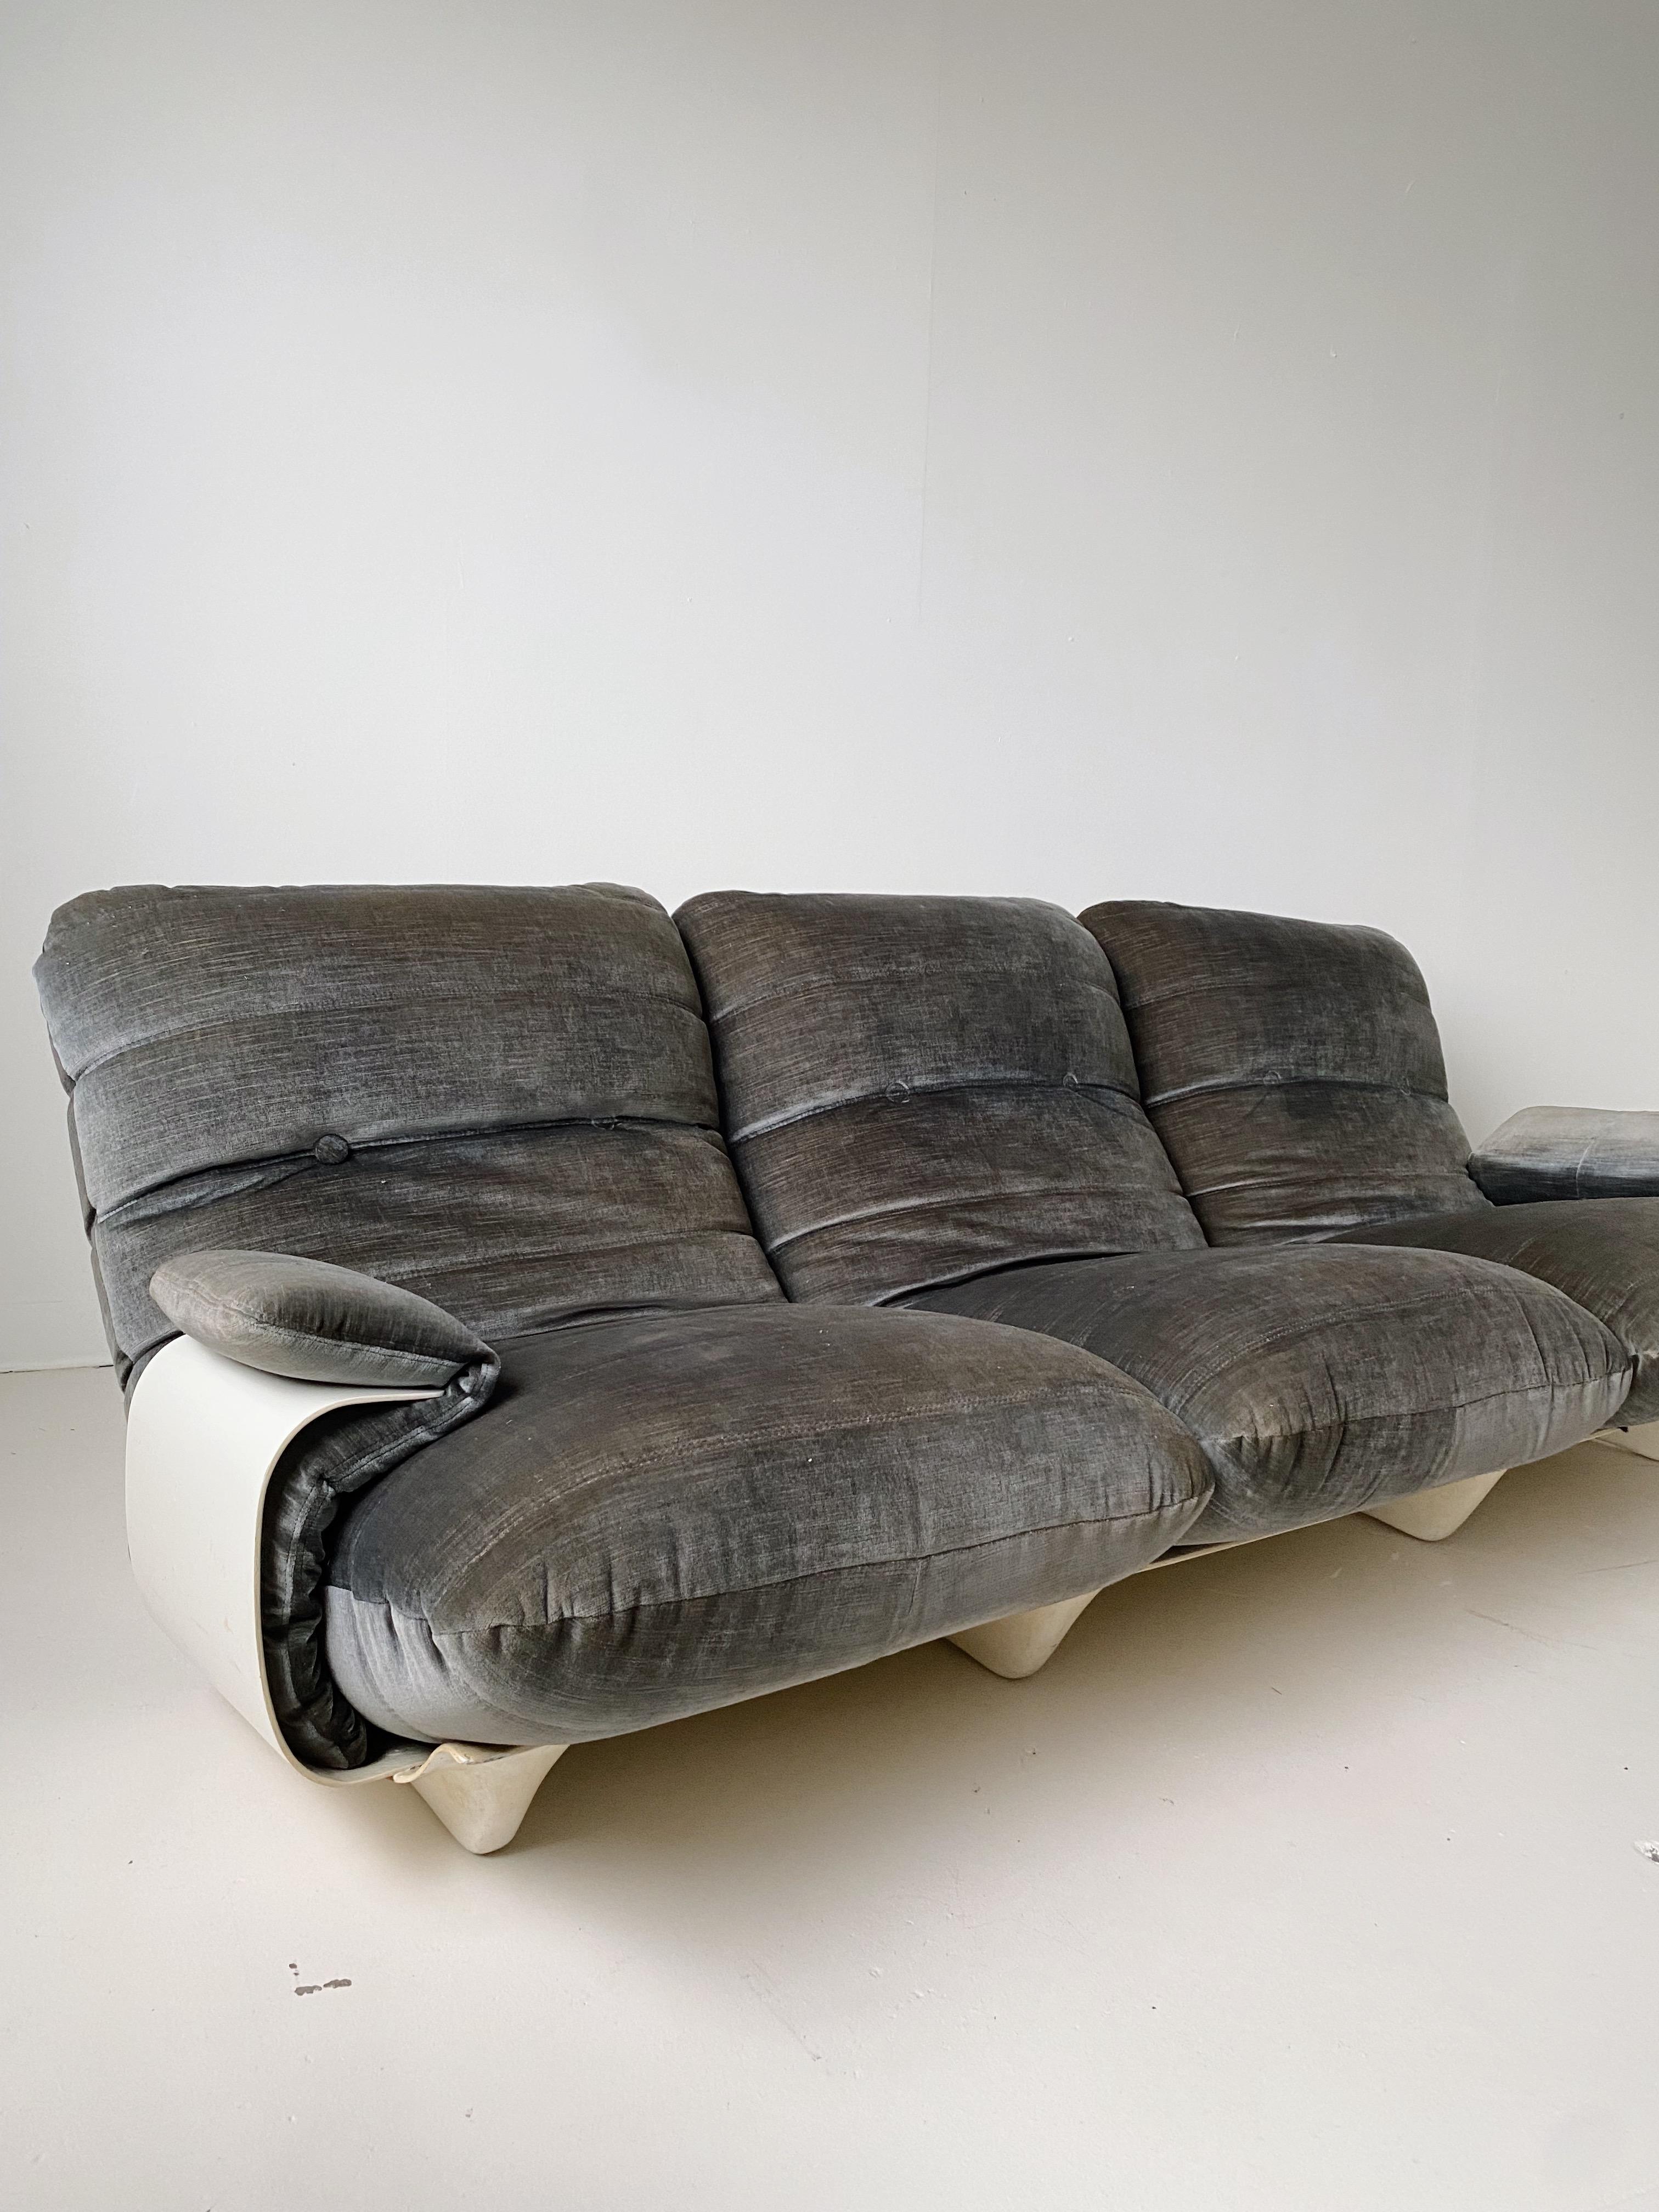 3 Seater Marsala Sofa by Michel Ducaroy for Ligne Roset, 70's

Features a RARE off white fiberglass base and gray velour cushions.

//

Dimensions:
86”W x 40”D x 29”H 

Seat height 16